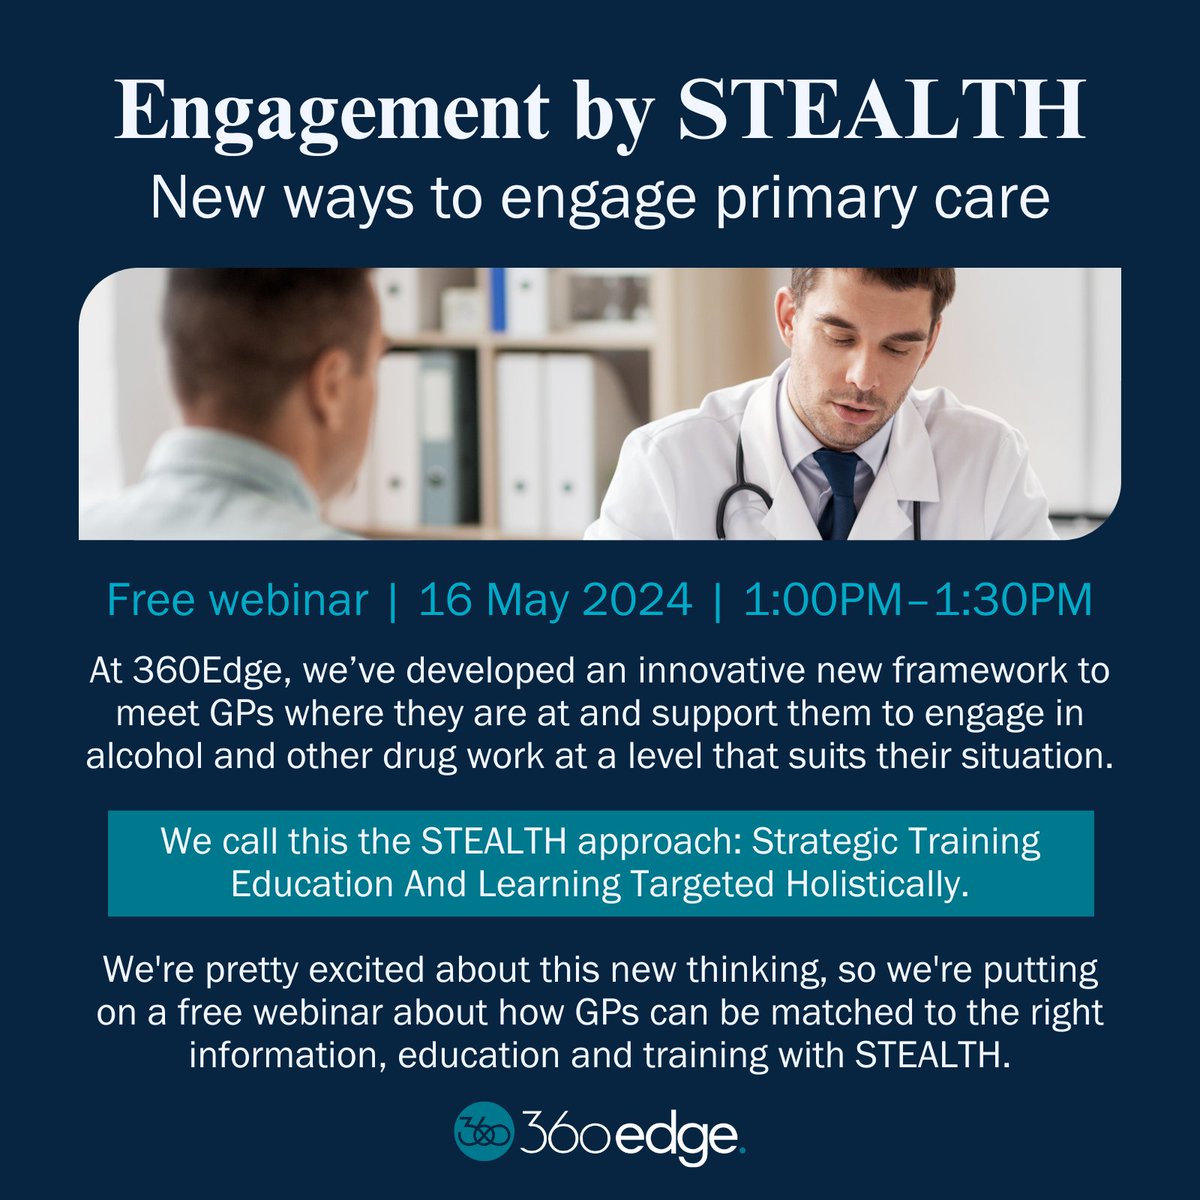 GPs are often the first port of call for AOD related issues, but getting GPs more interested in AOD has always been a challenge. Join us at our free webinar on the STEALTH approach to learn about our innovative solution to this dilemma. Book here: bit.ly/49XD0sl